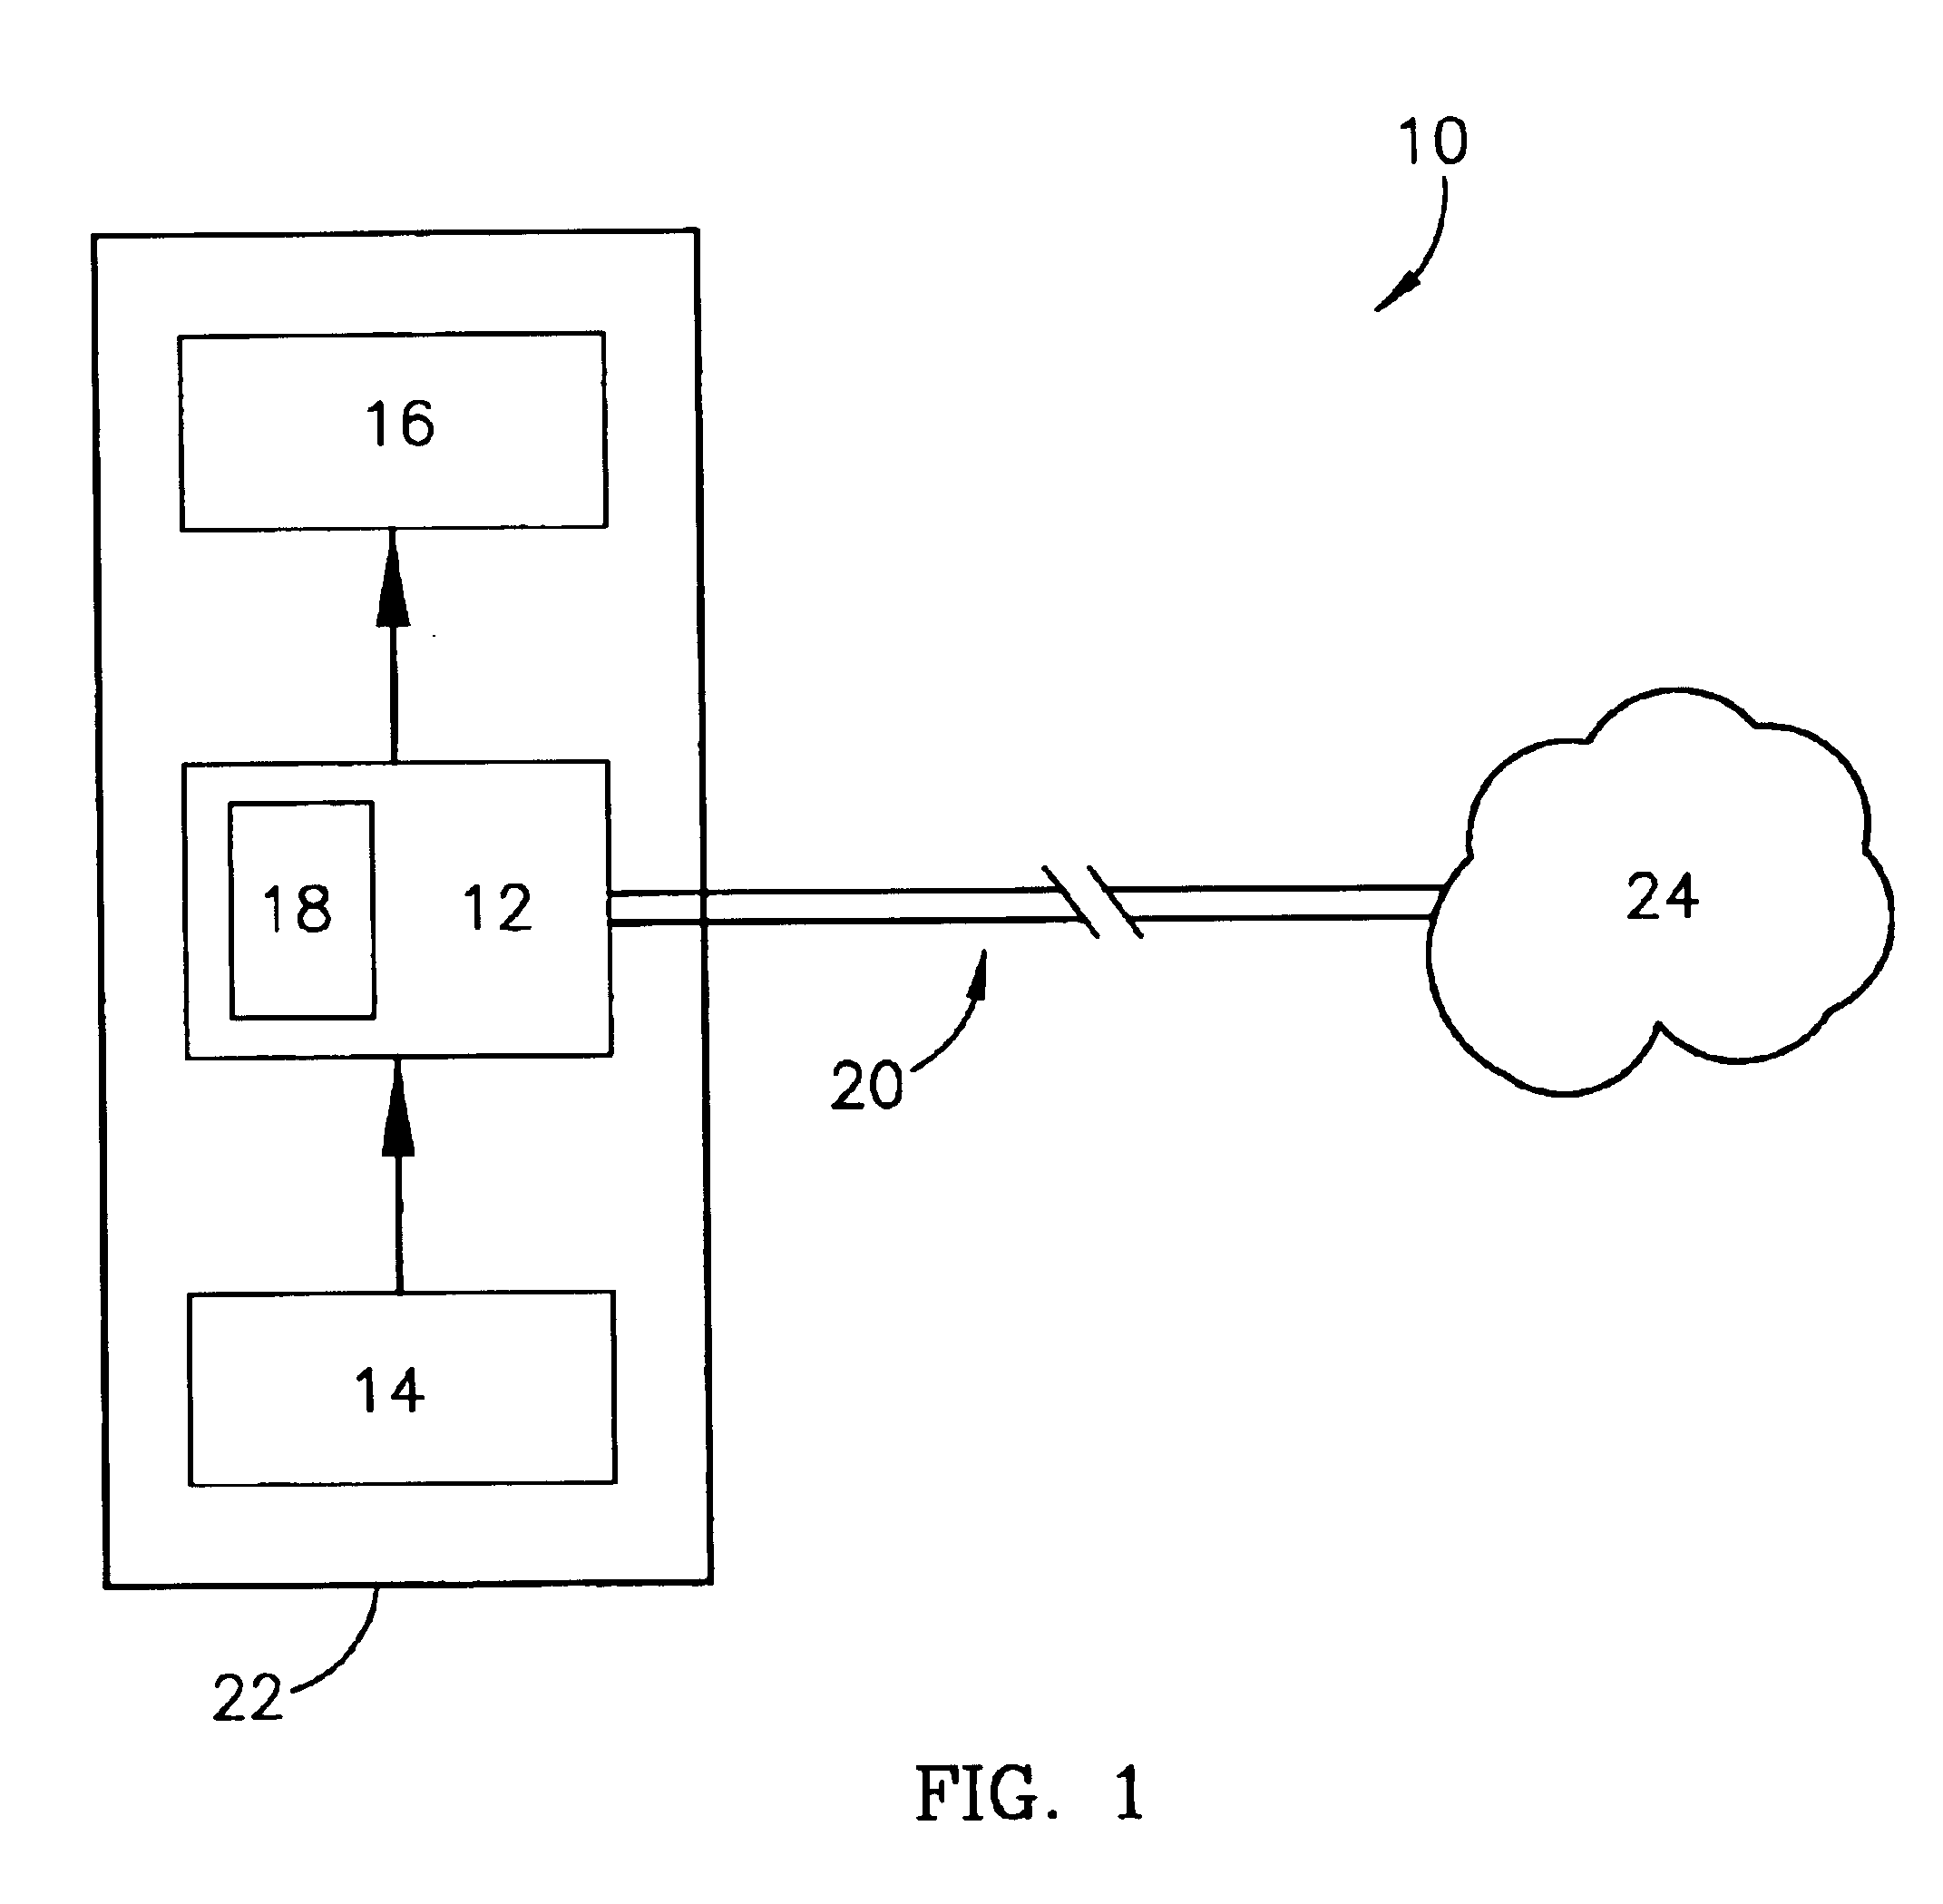 Computer program, method, and system for monitoring nutrition content of consumables and for facilitating menu planning